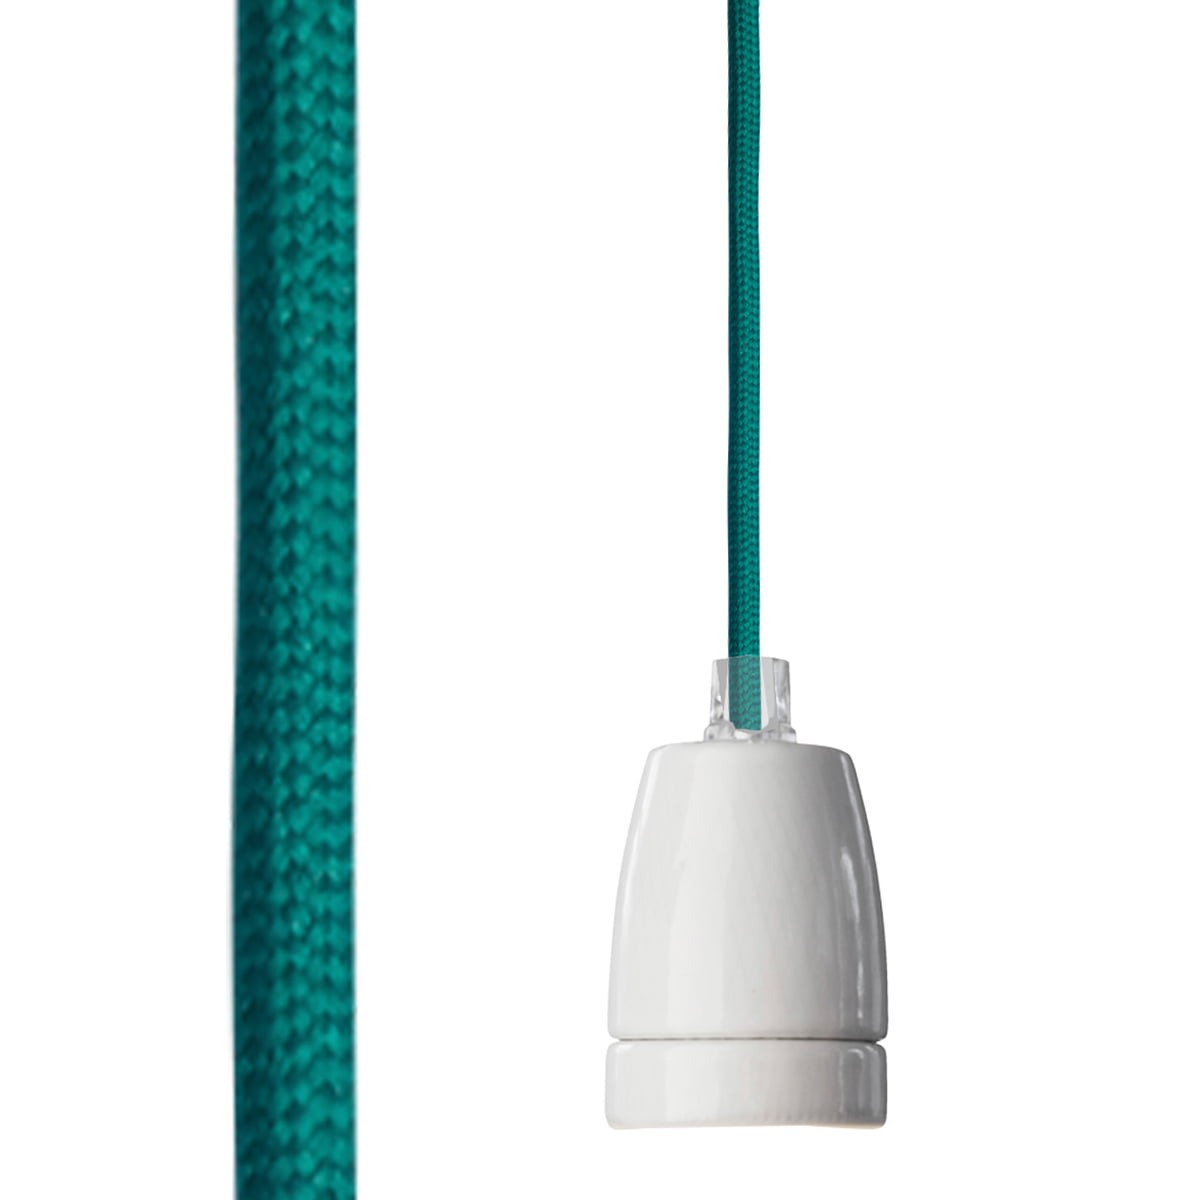 nud collection - classic white, turquoise (tt07-36)